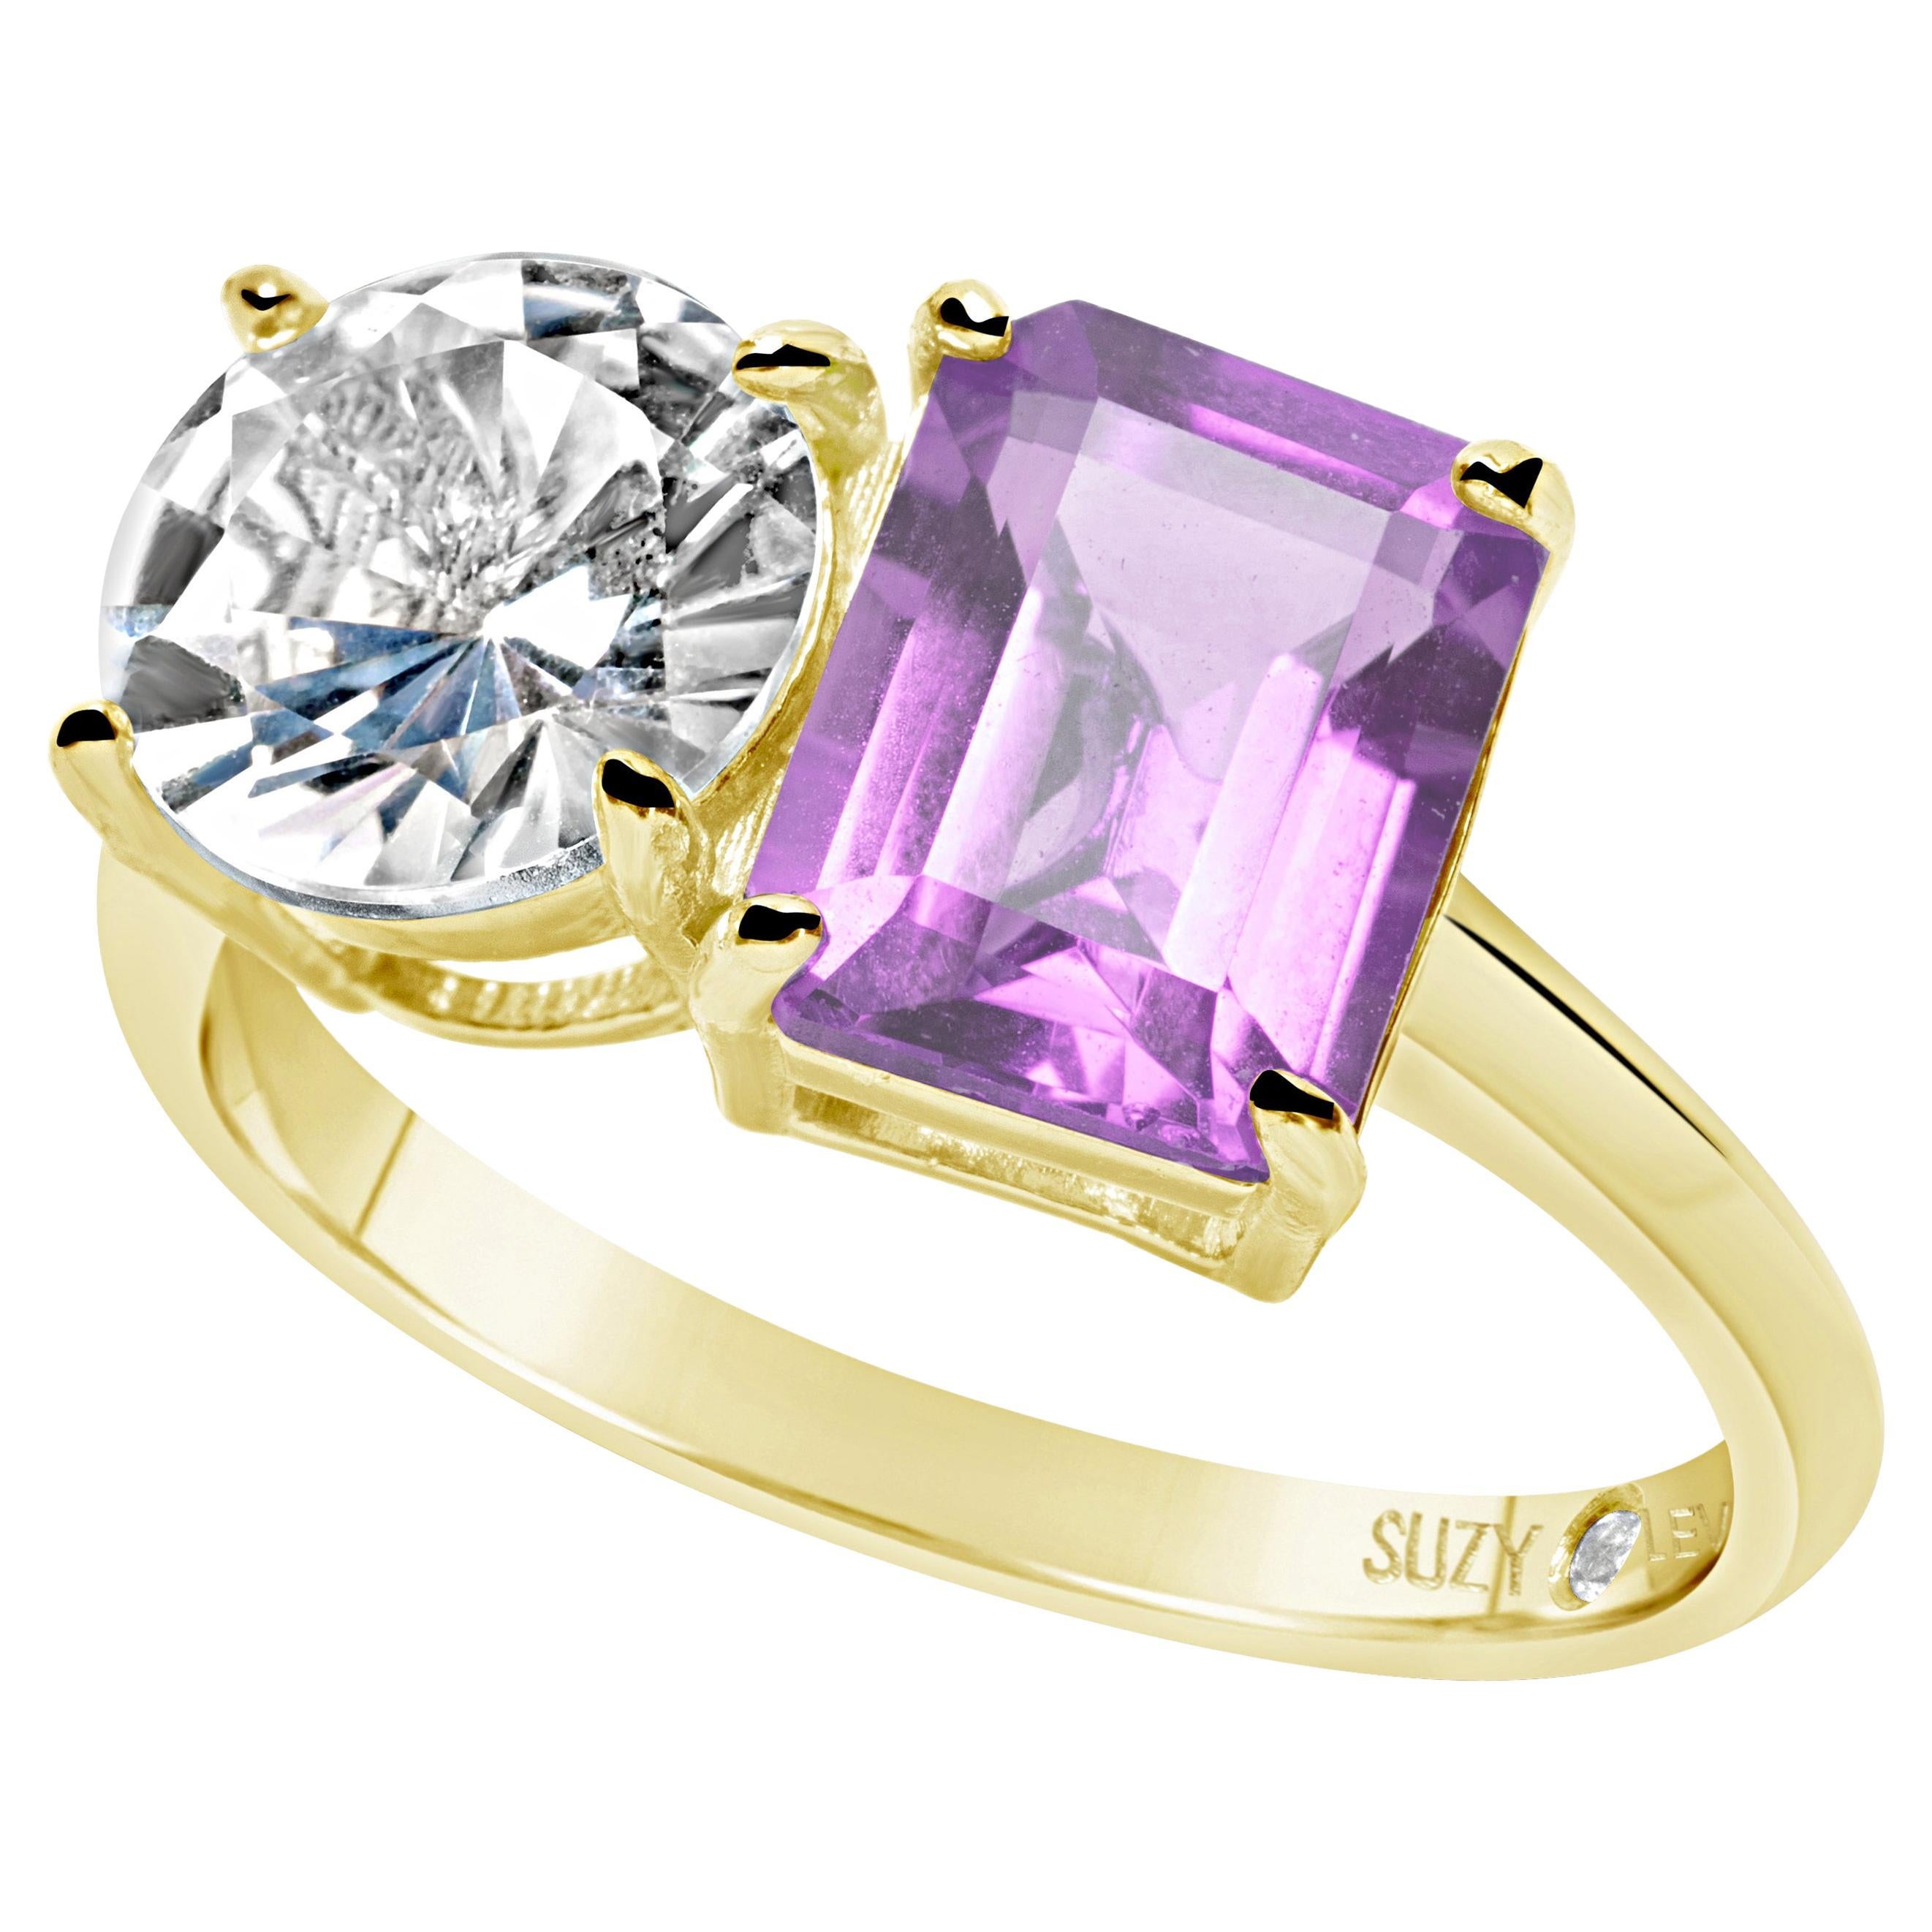 Suzy Levian Yellow Sterling Silver White Topaz & Purple Amethyst Two Stone Ring (bague à deux pierres)